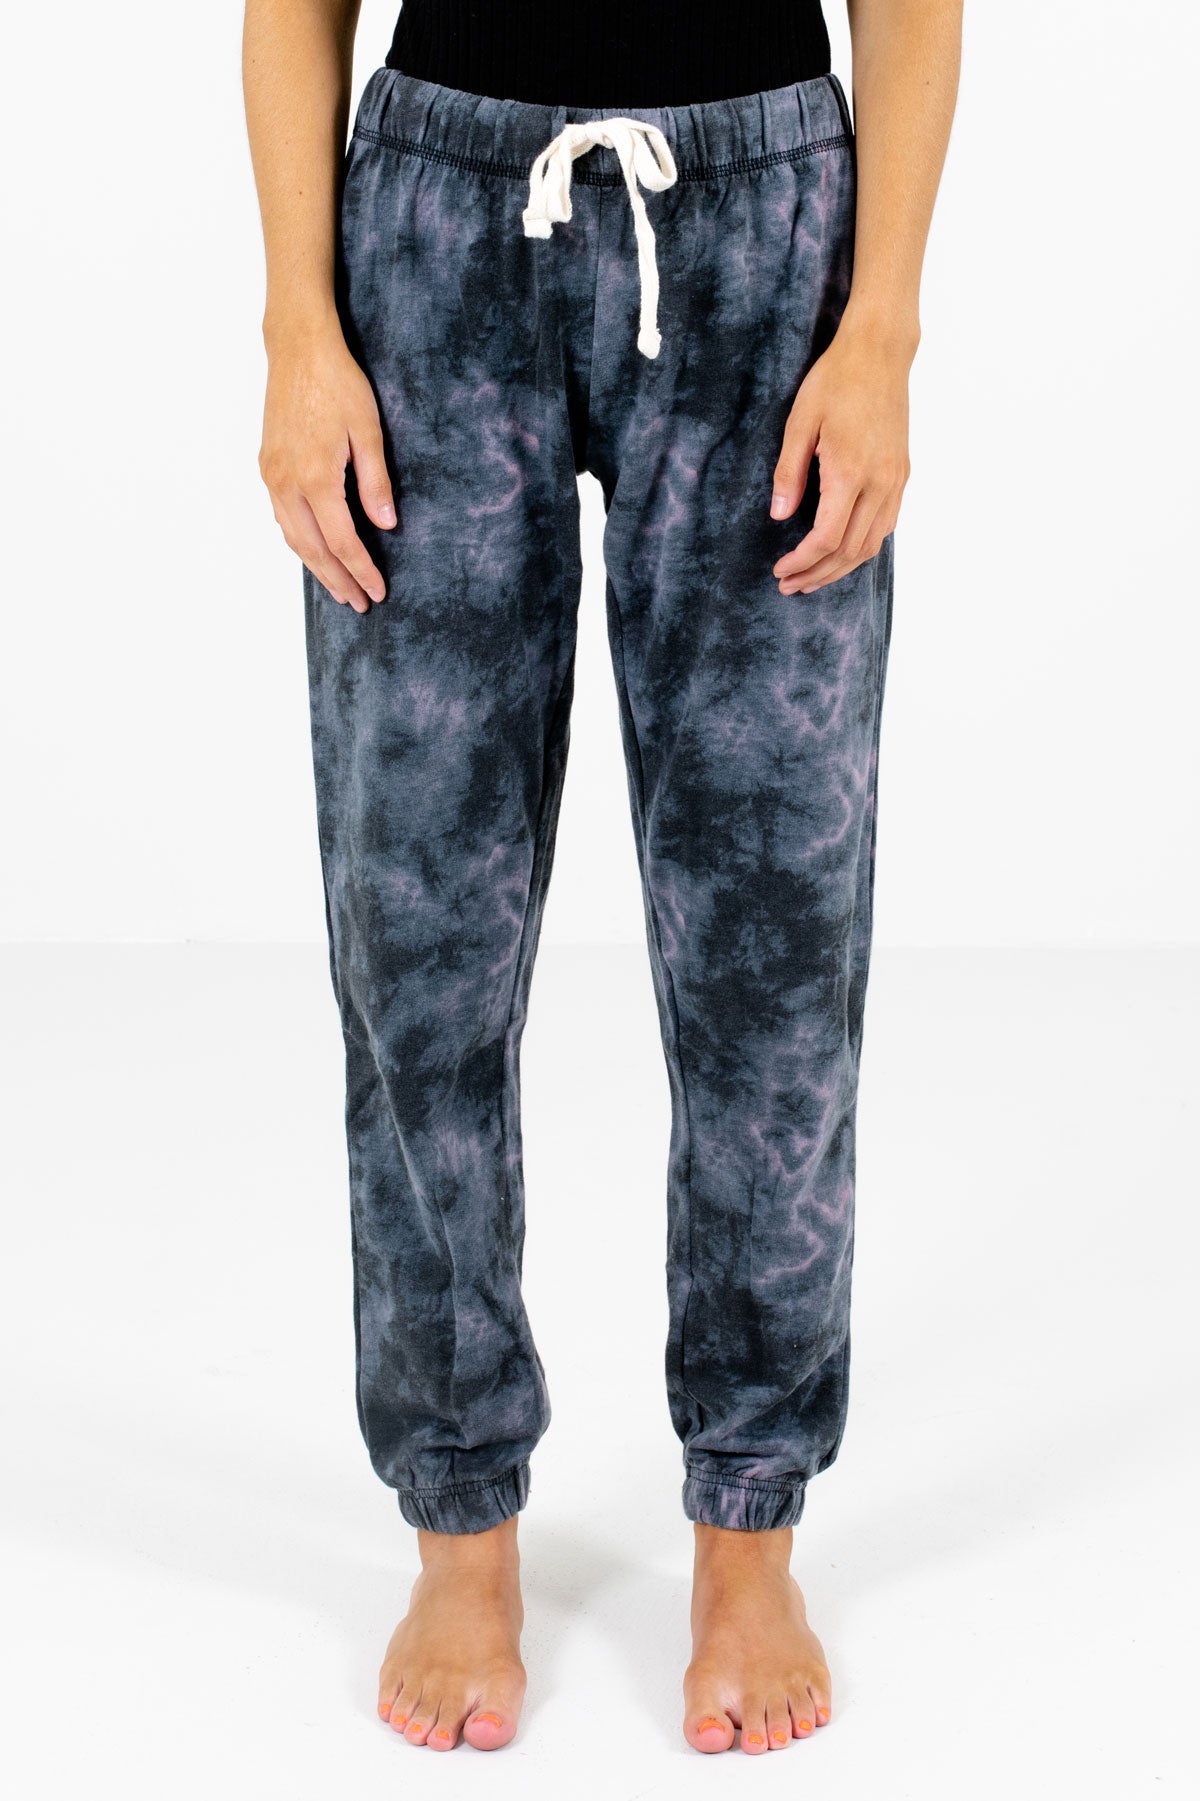 Charcoal Gray Tie-Dye Print Boutique Joggers for Women